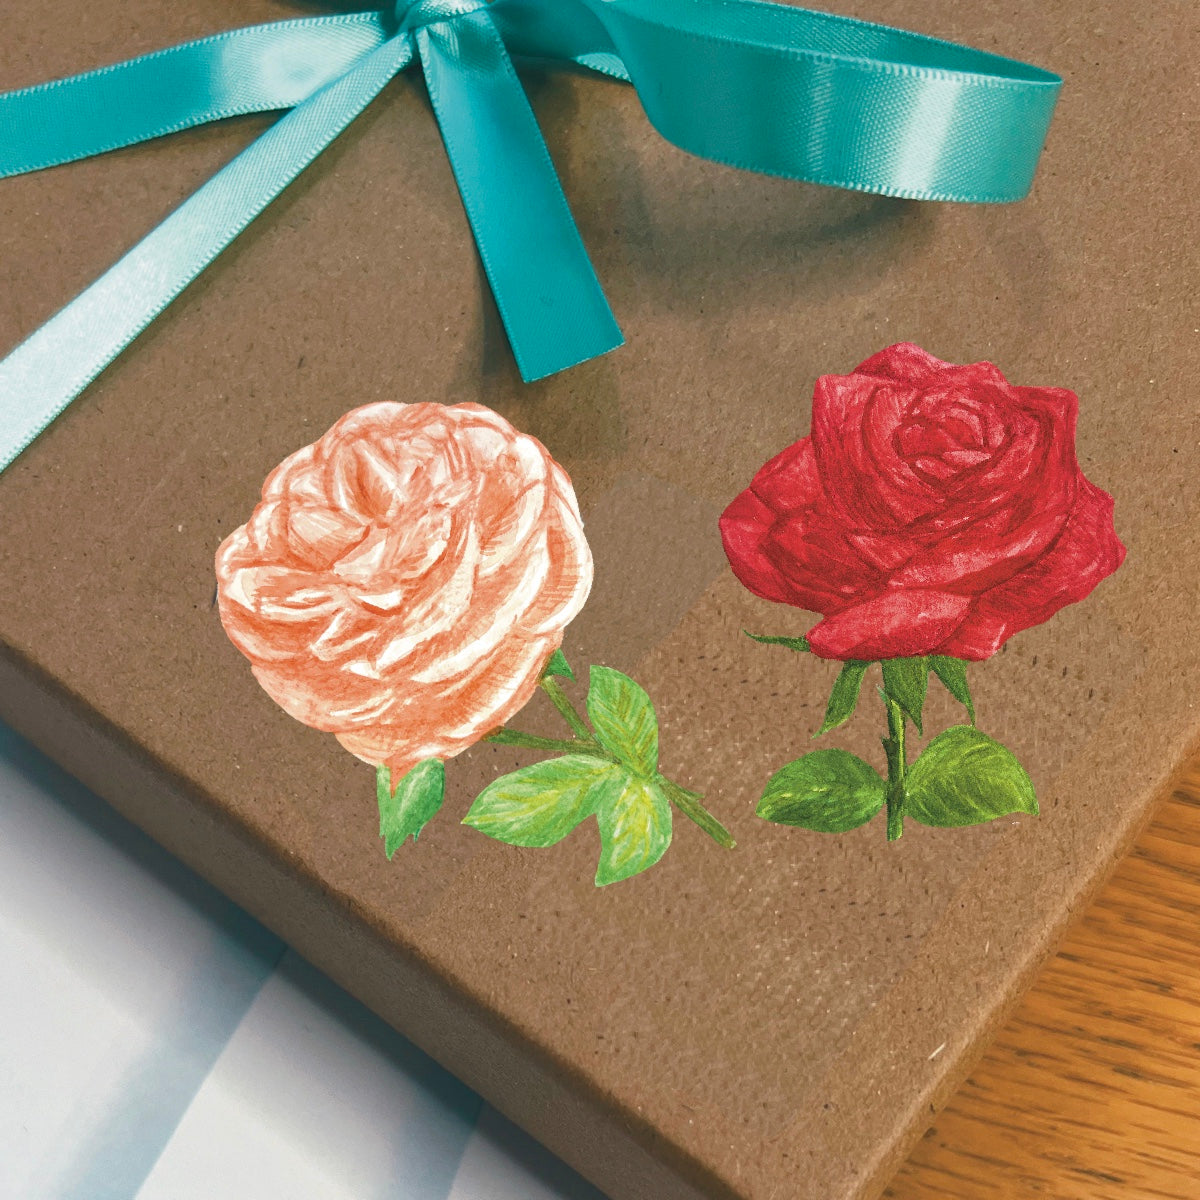 A blossoming peach and red rose set of die cut stickers with and easier to peel edge on a gift box wrapped with a blue ribbon